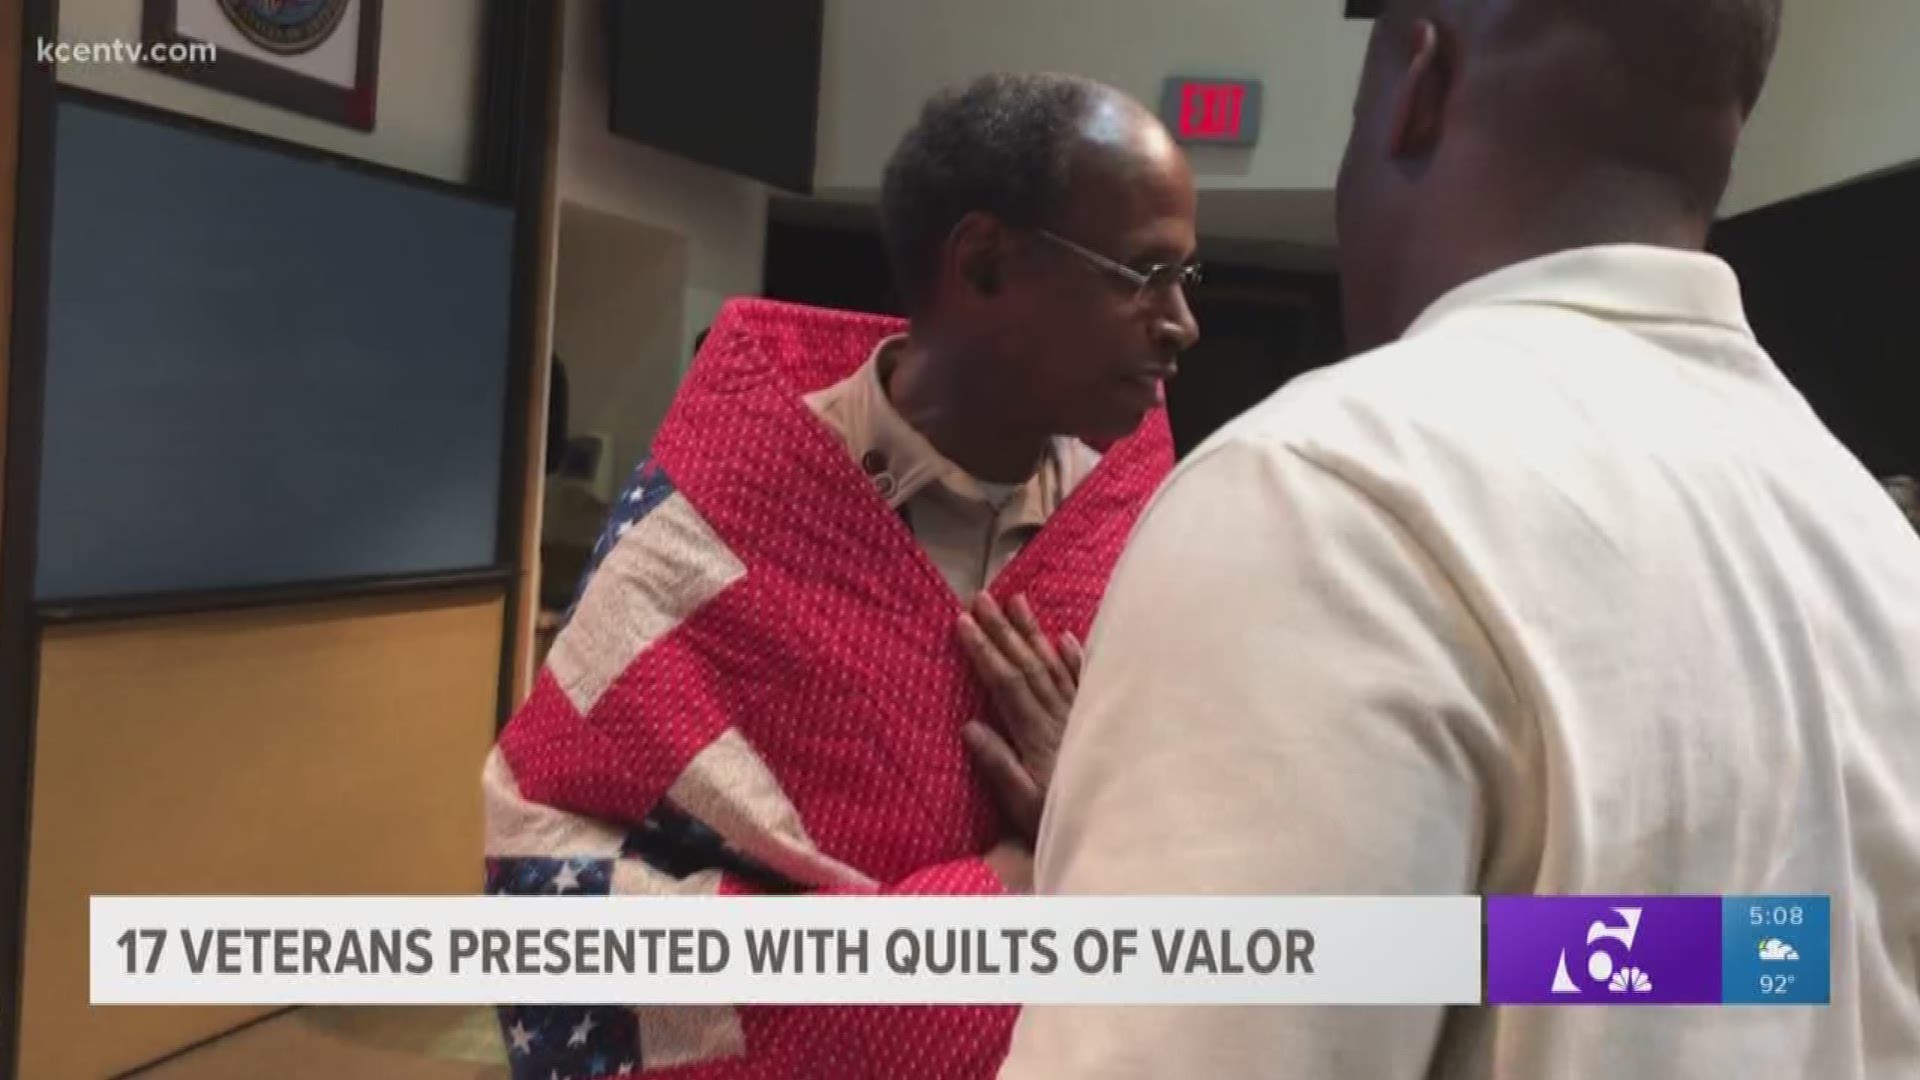 The Quilts of Valor are made by volunteers and presented to nominated veterans to help them combat their despair and heal.